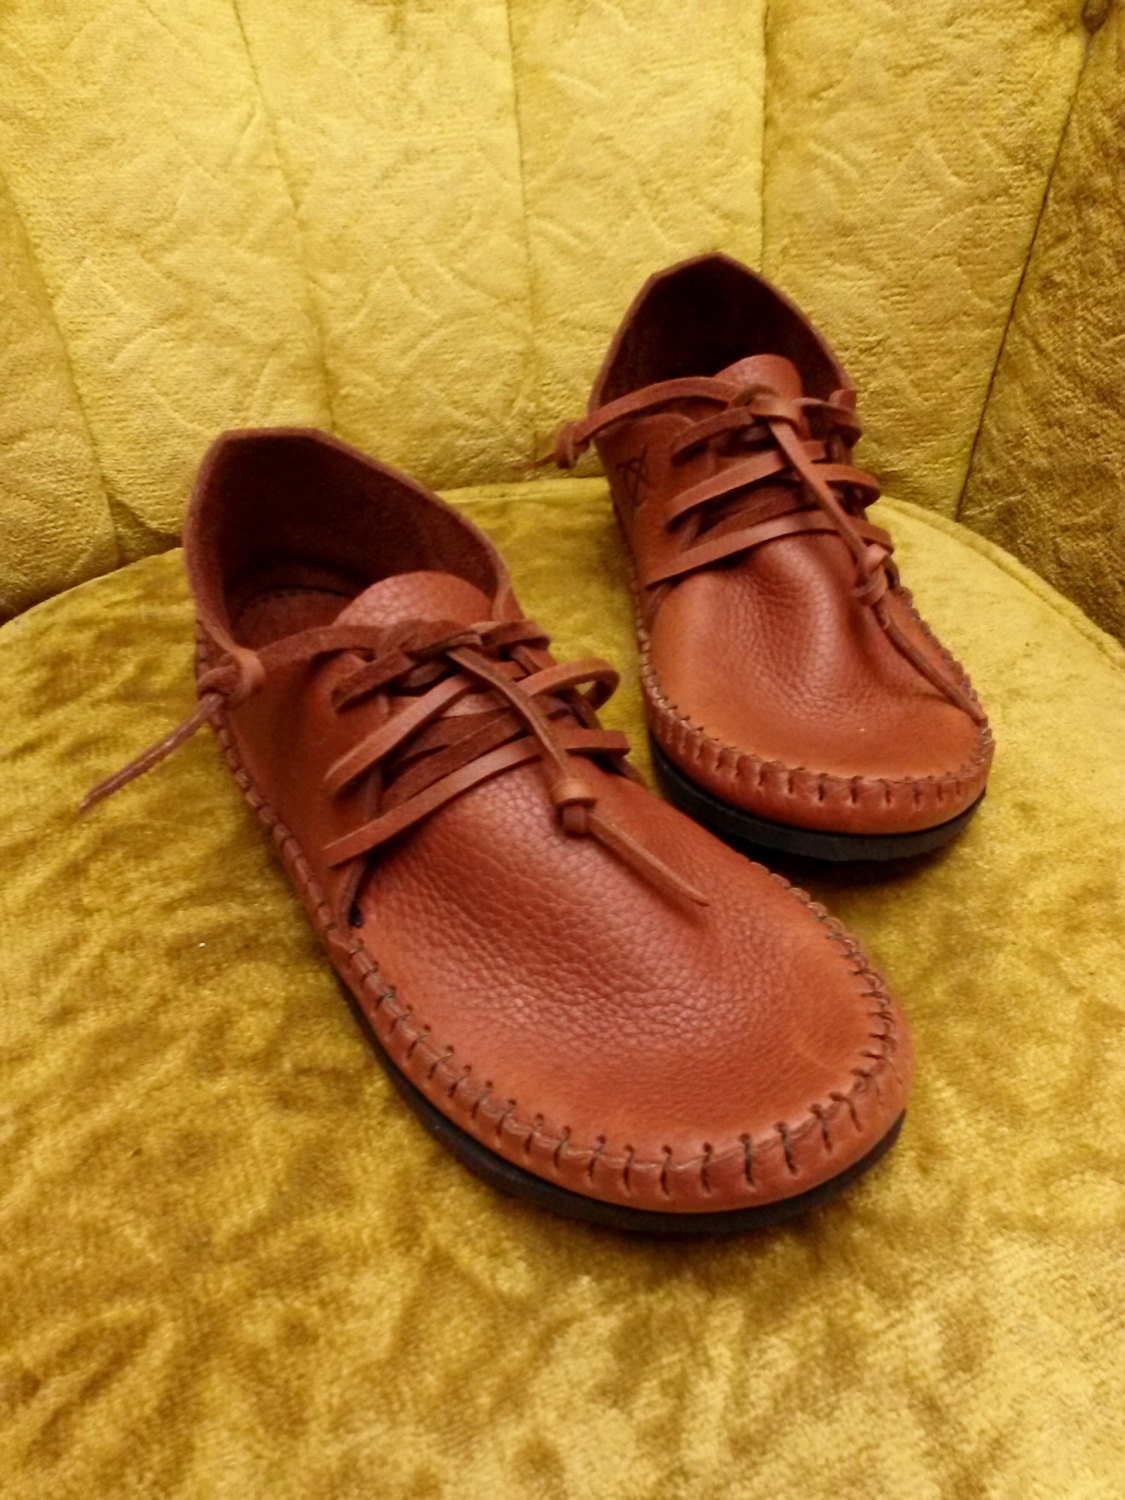 NEW Sneakasin Moccasin Hand Stitched Soft Bullhide Leather